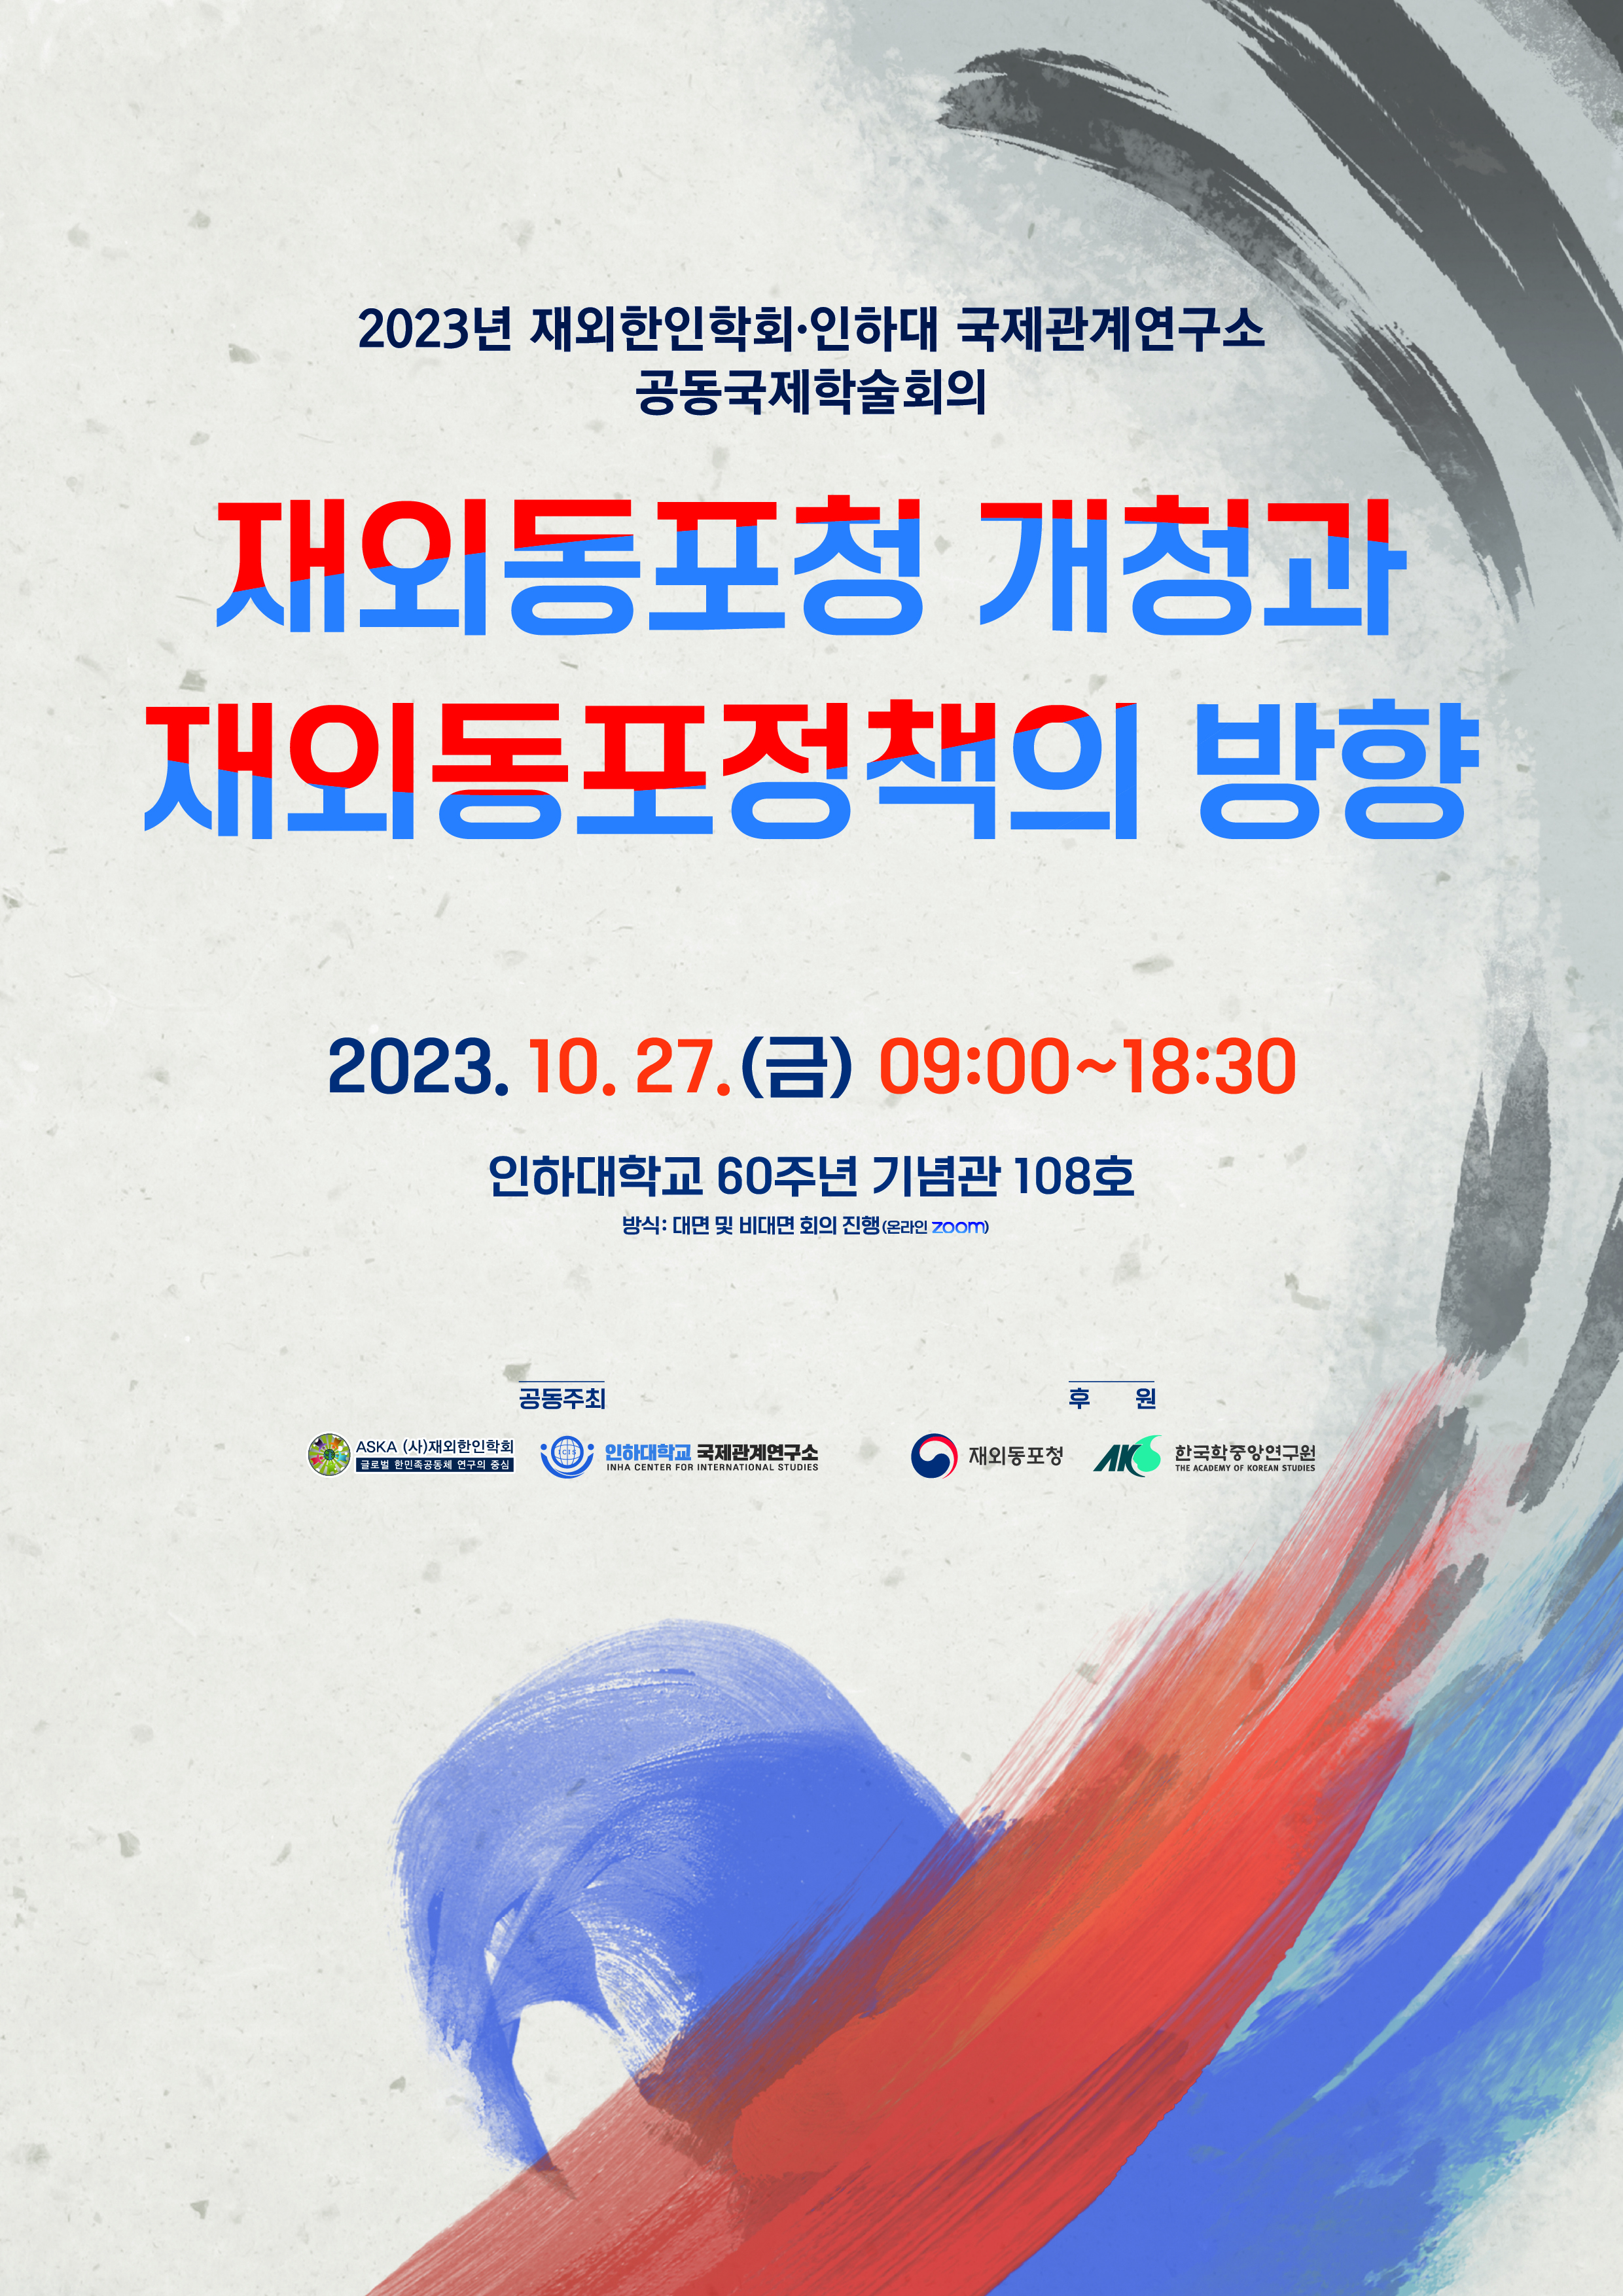 [Inha CIS] The Opening of the Overseas Compatriots Agency and the Direction of Policies Regarding Overseas Compatriots                                 썸네일